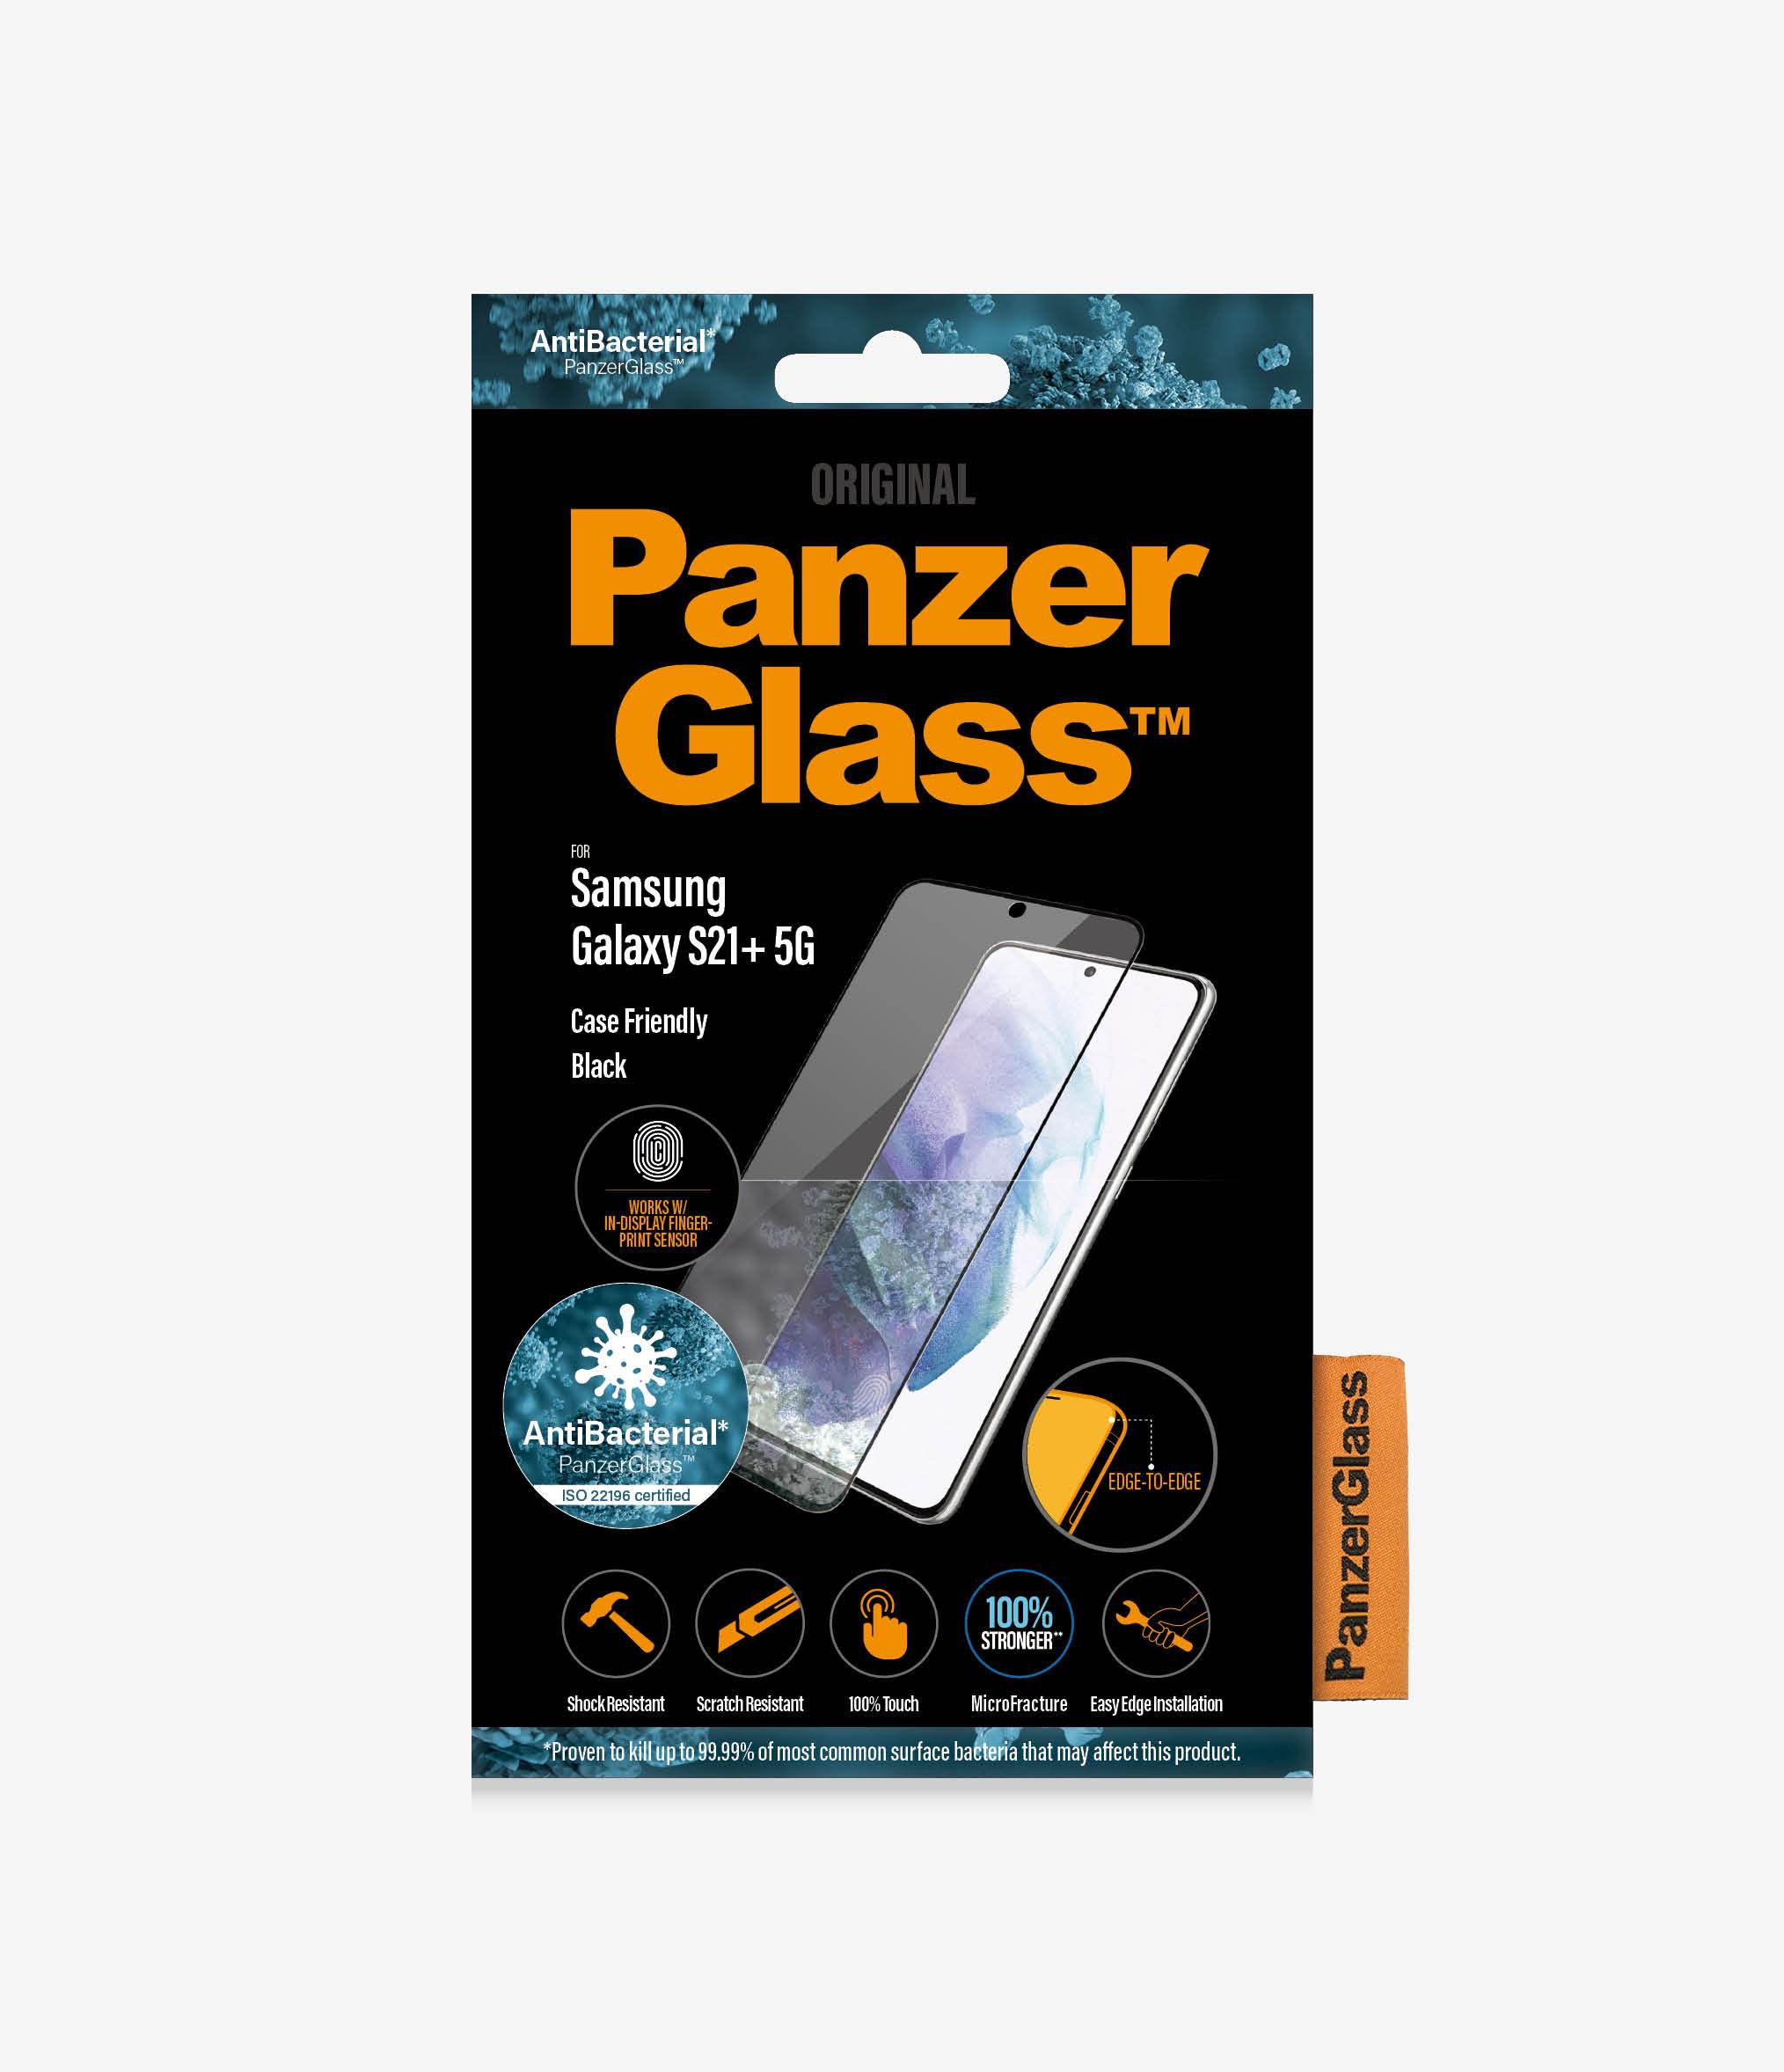 PanzerGlass™ Samsung Galaxy S21+ - Clear Glass (7257) - Screen Protector - Full frame coverage, Rounded edges, Crystal clear, 100% touch preservation